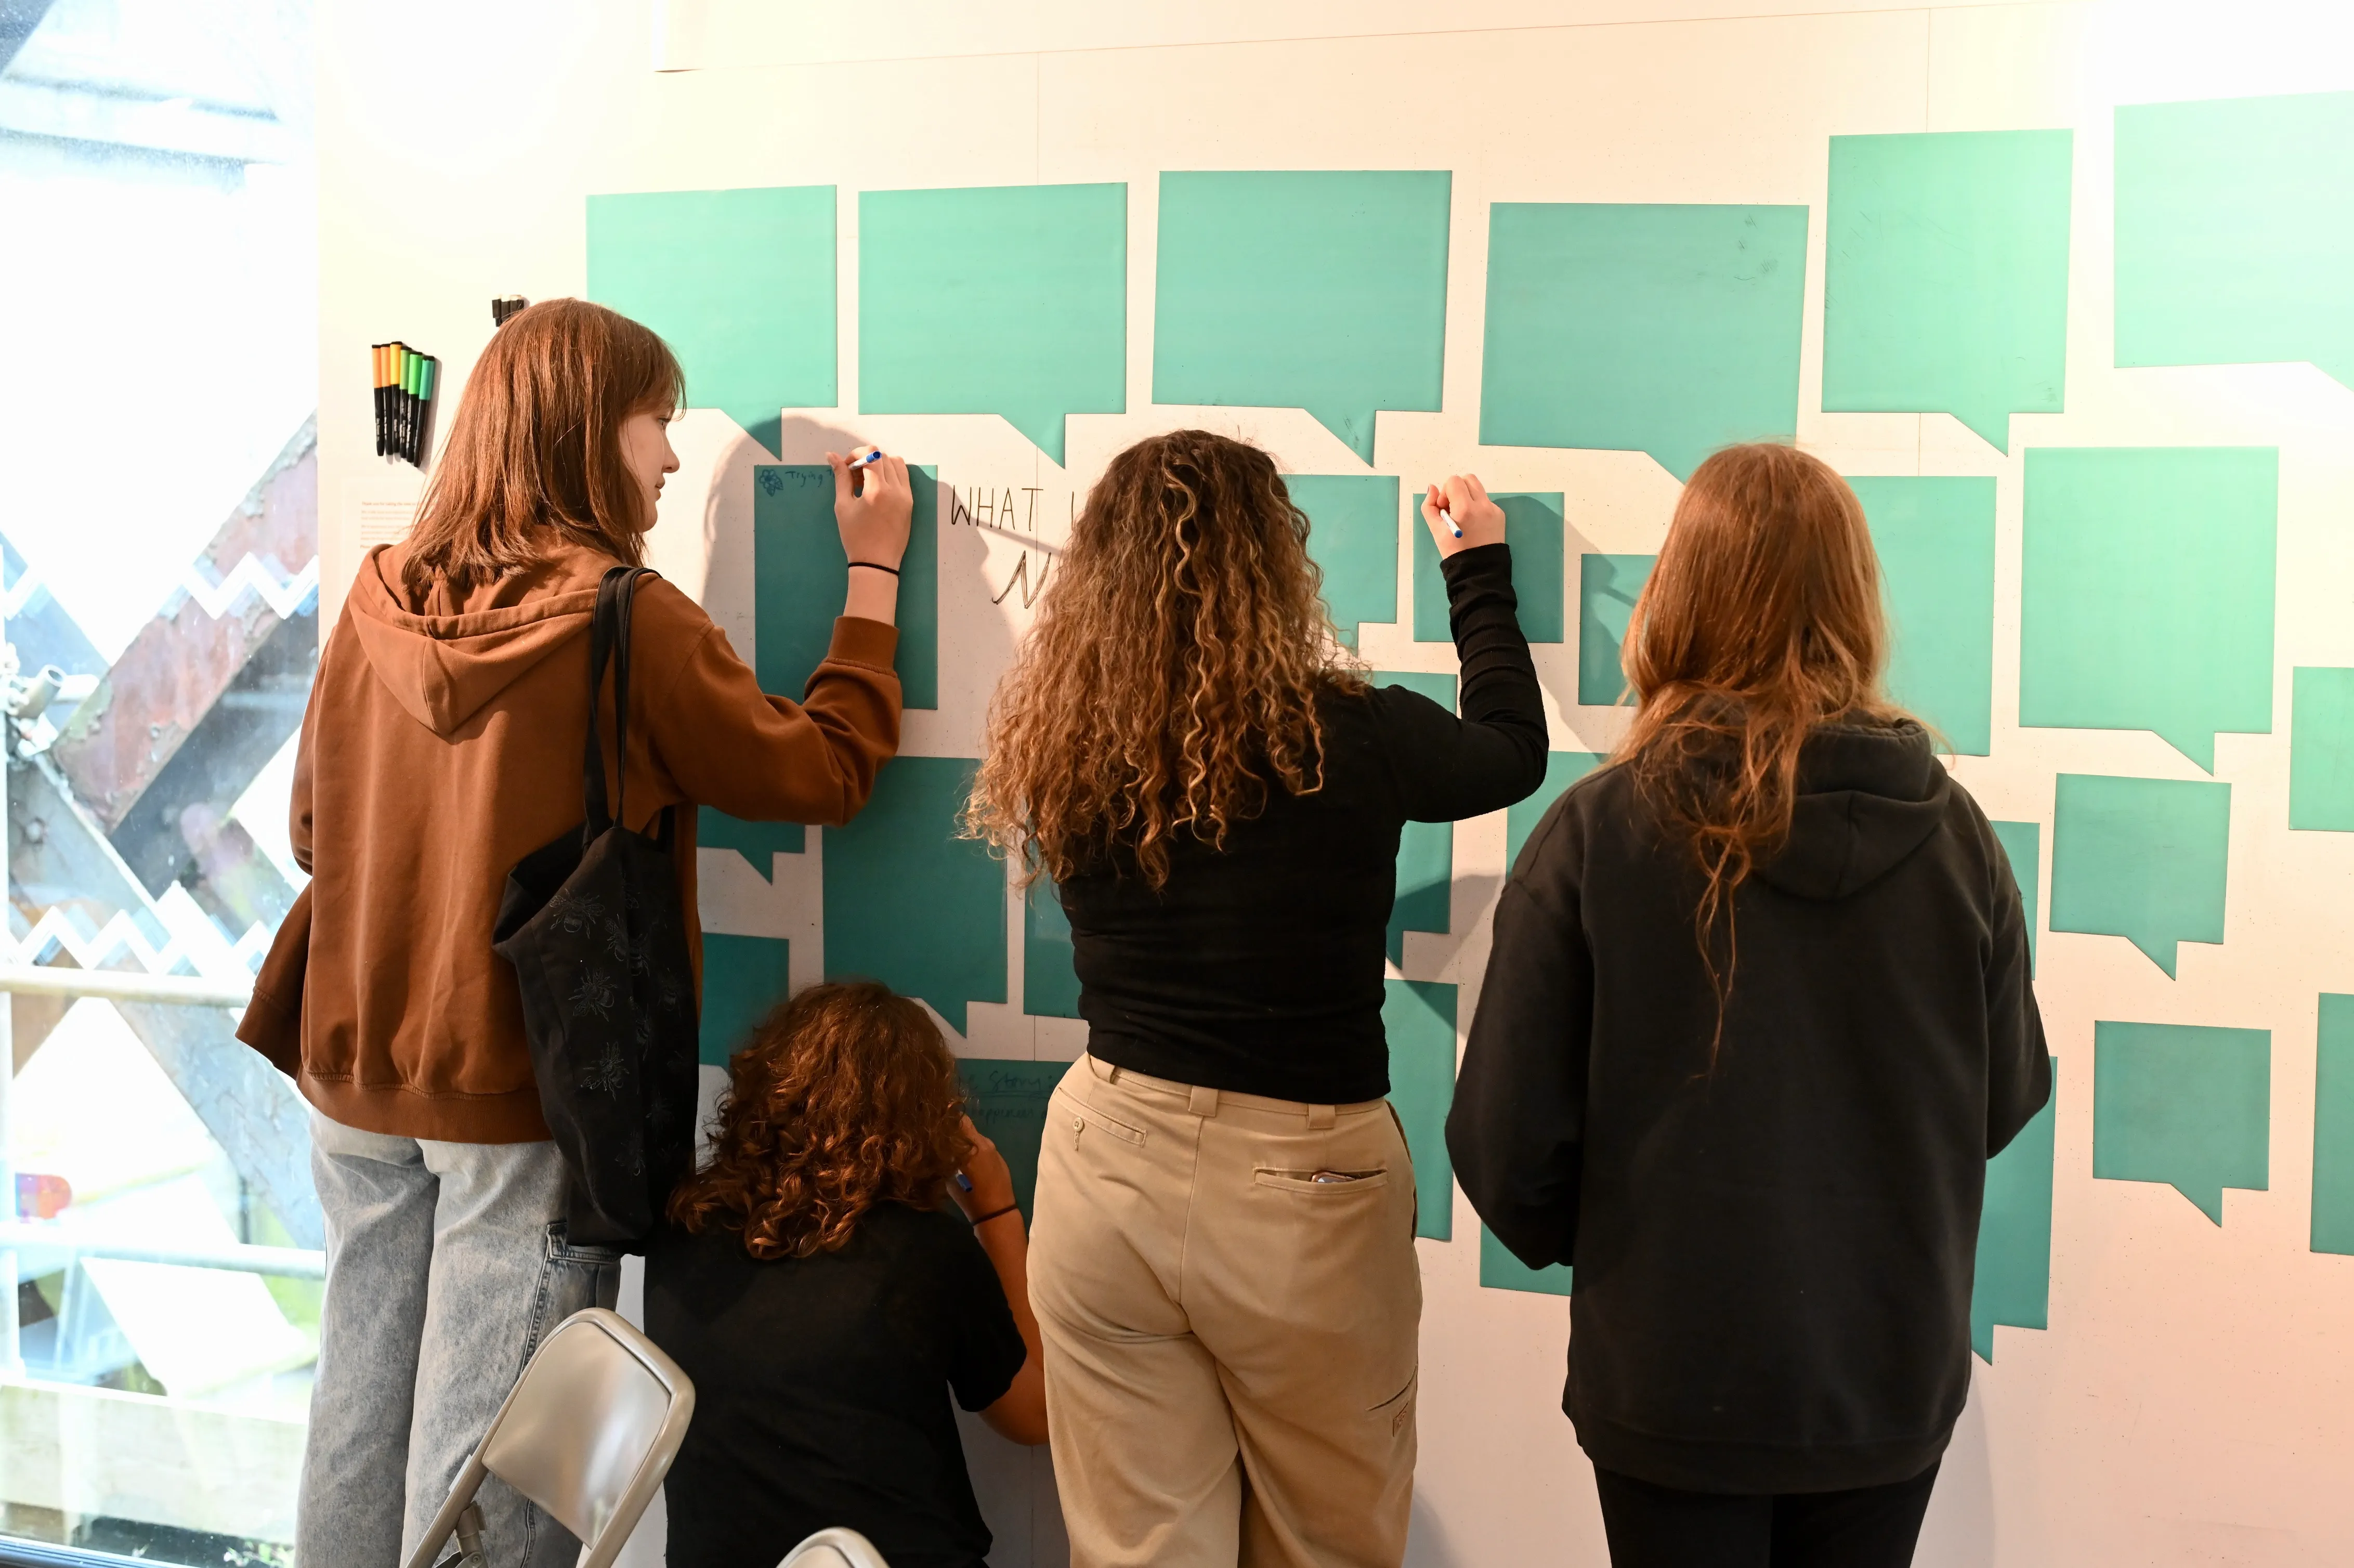 Young people brainstorming ideas on a wall.